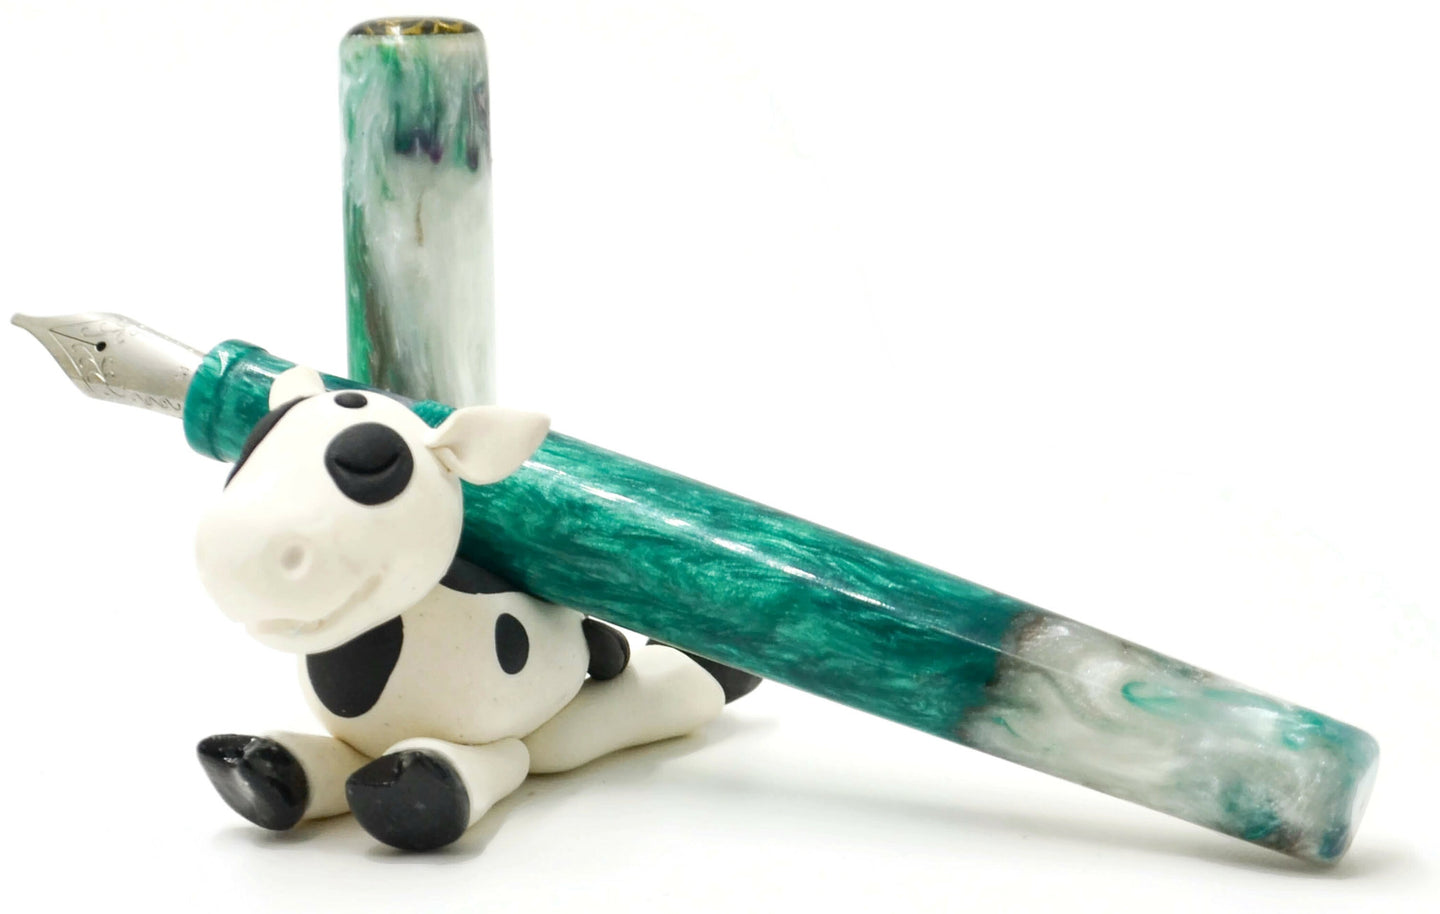 B24  -  (Starry Night Resins) - Uncle Kenney Pen (220630)